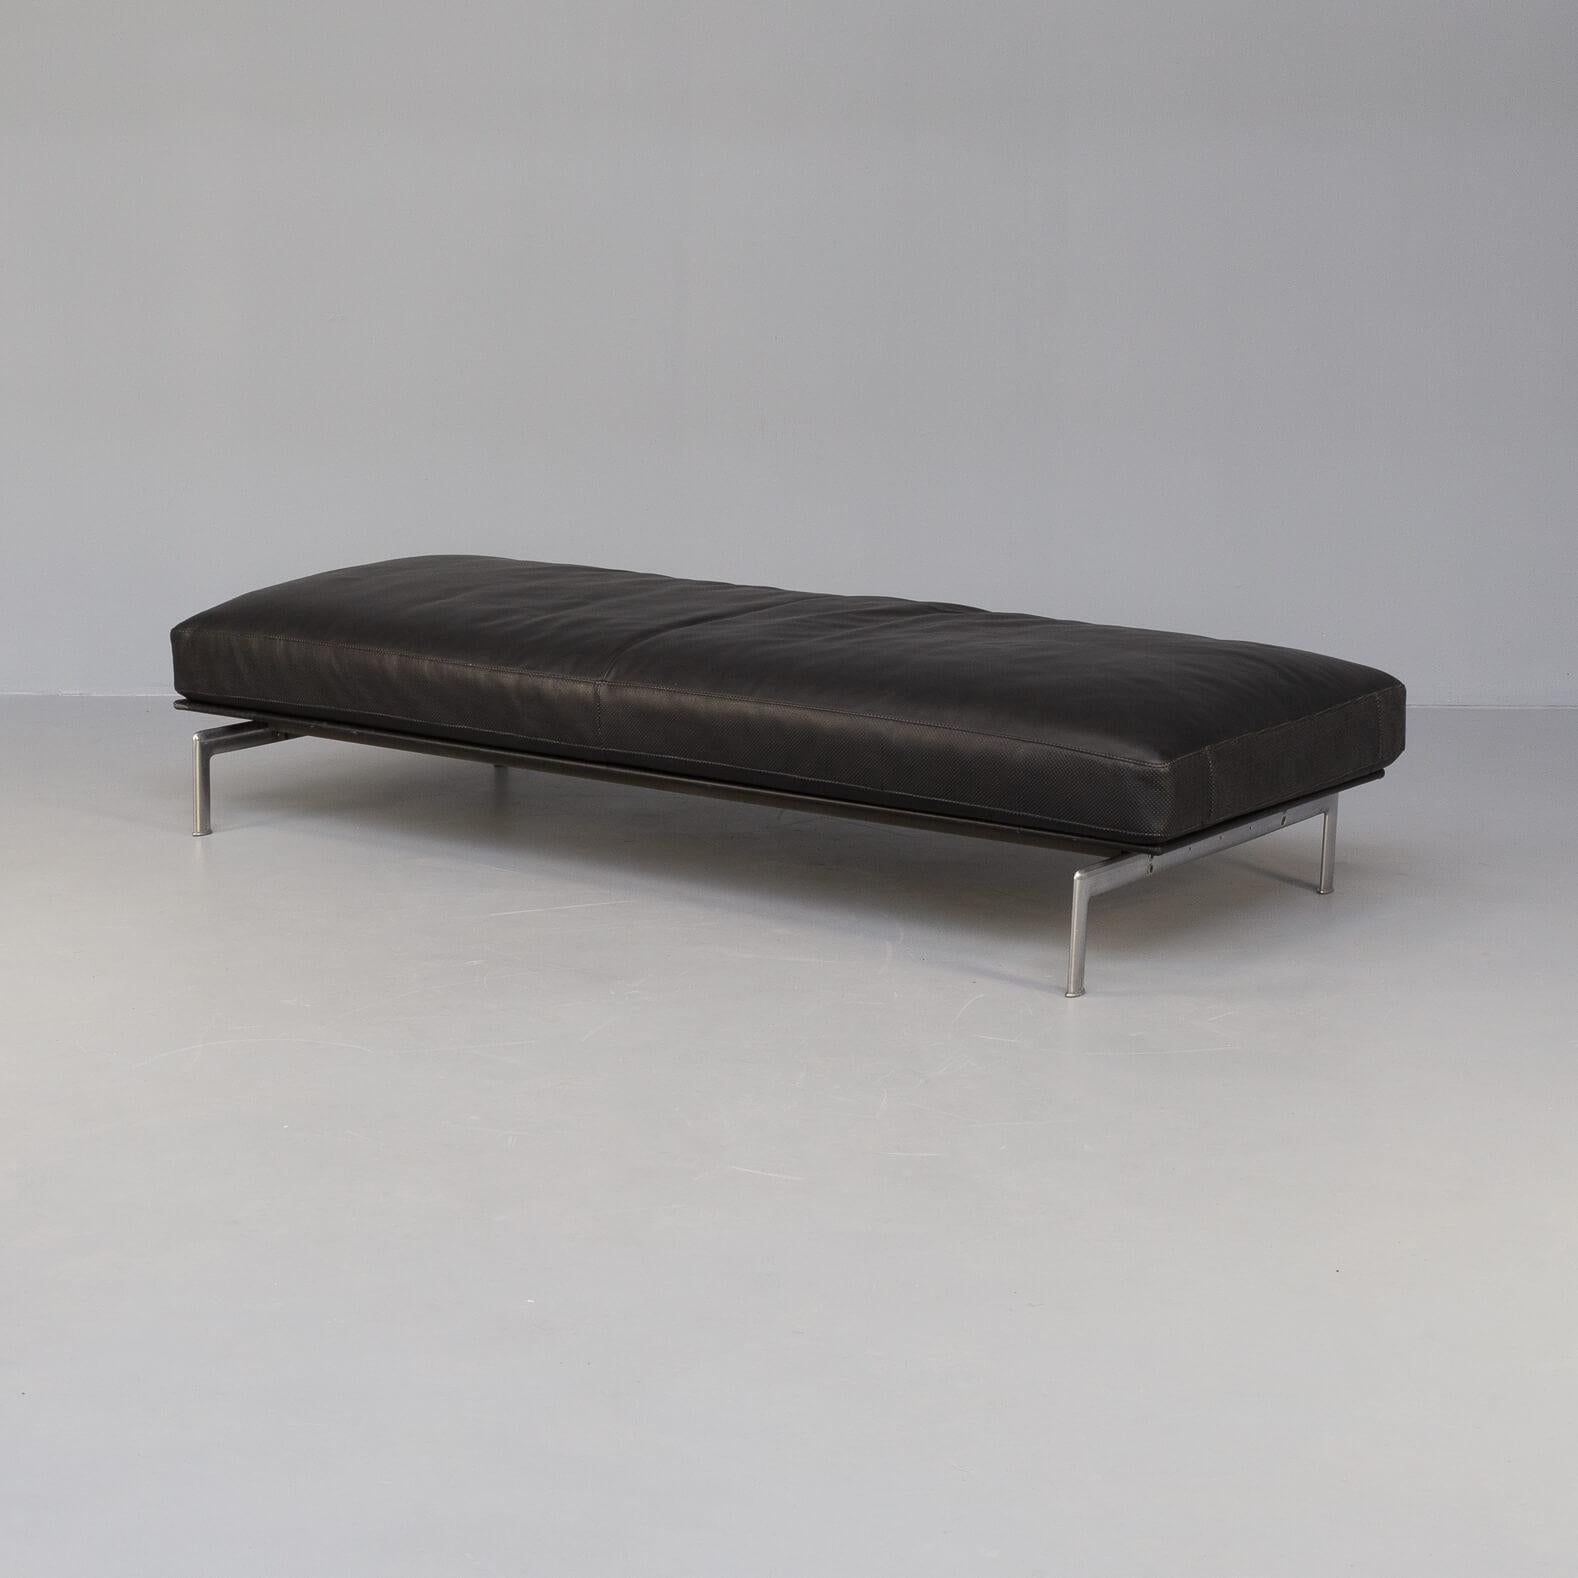 80s Antonio Citterio and Paolo Nava Black Leather “Diesis” Daybed for B&B Italia In Good Condition For Sale In Amstelveen, Noord